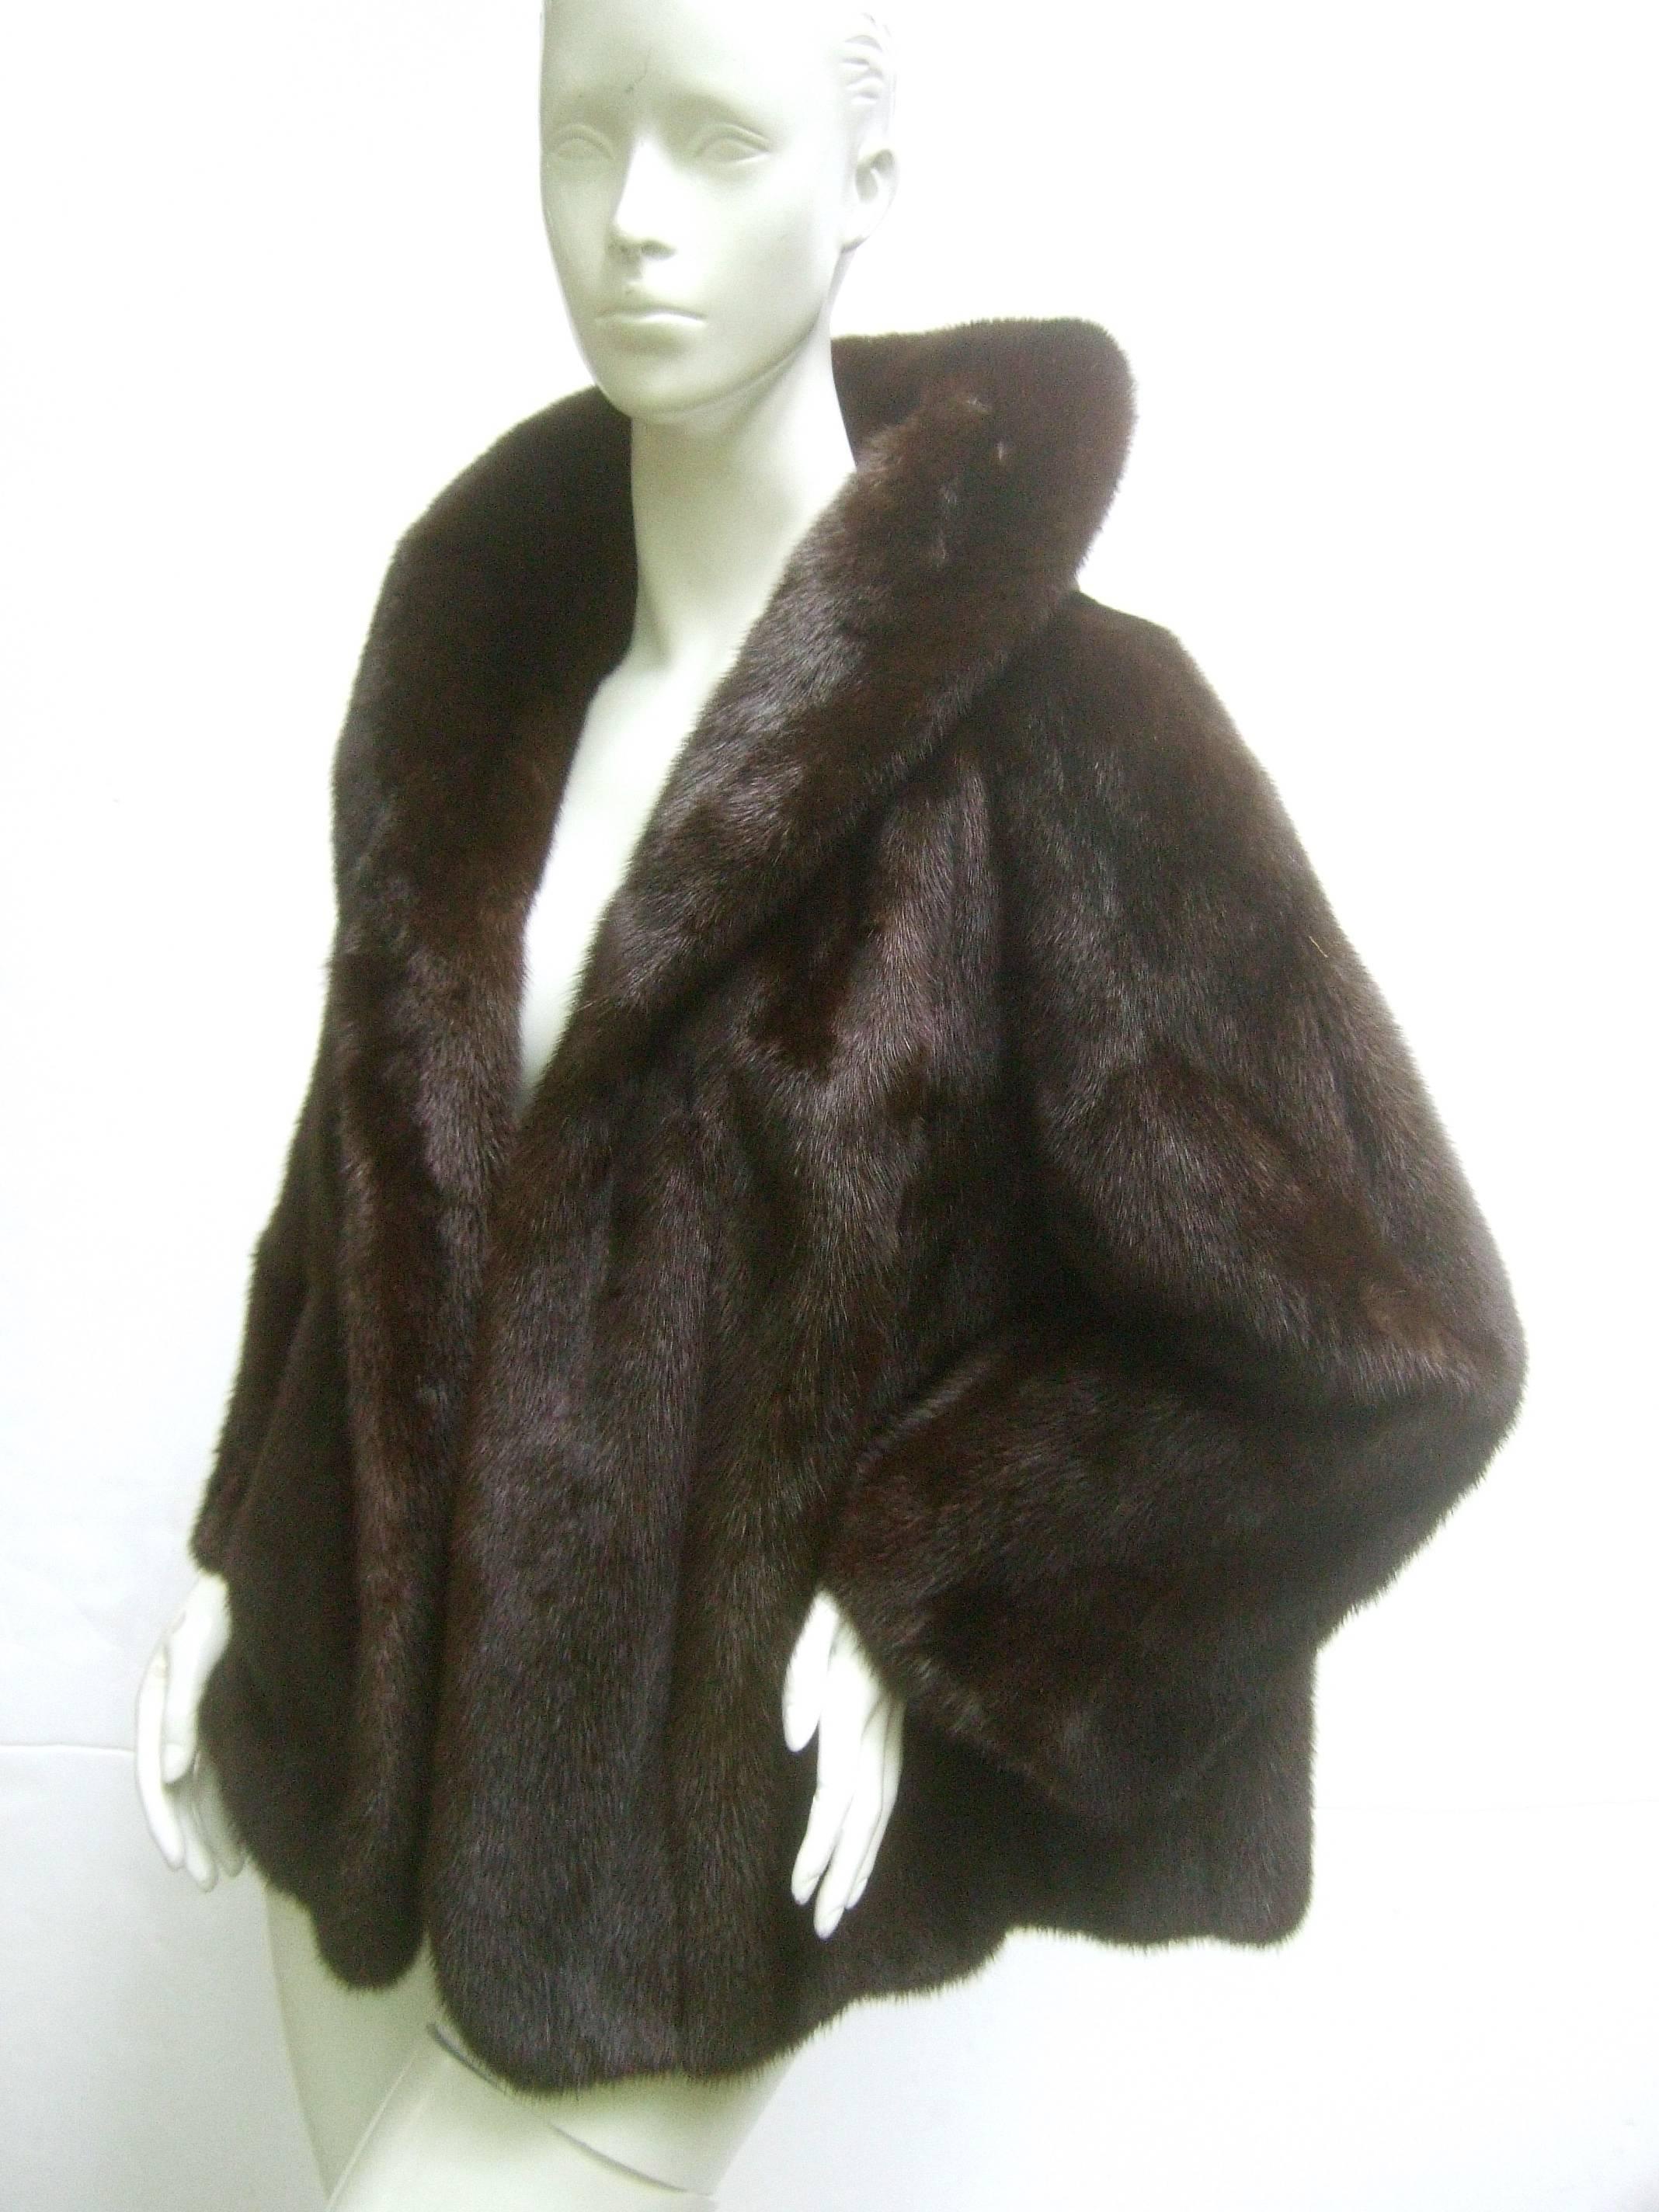 Revillon Paris sumptuous mahogany dark brown cropped jacket for Saks Fifth Avenue  c 1970s 

The luxurious mink jacket is designed with plush dark brown fur
The wide soft mink fur collar can be wrapped around the neck

The elegant ranch mink jacket